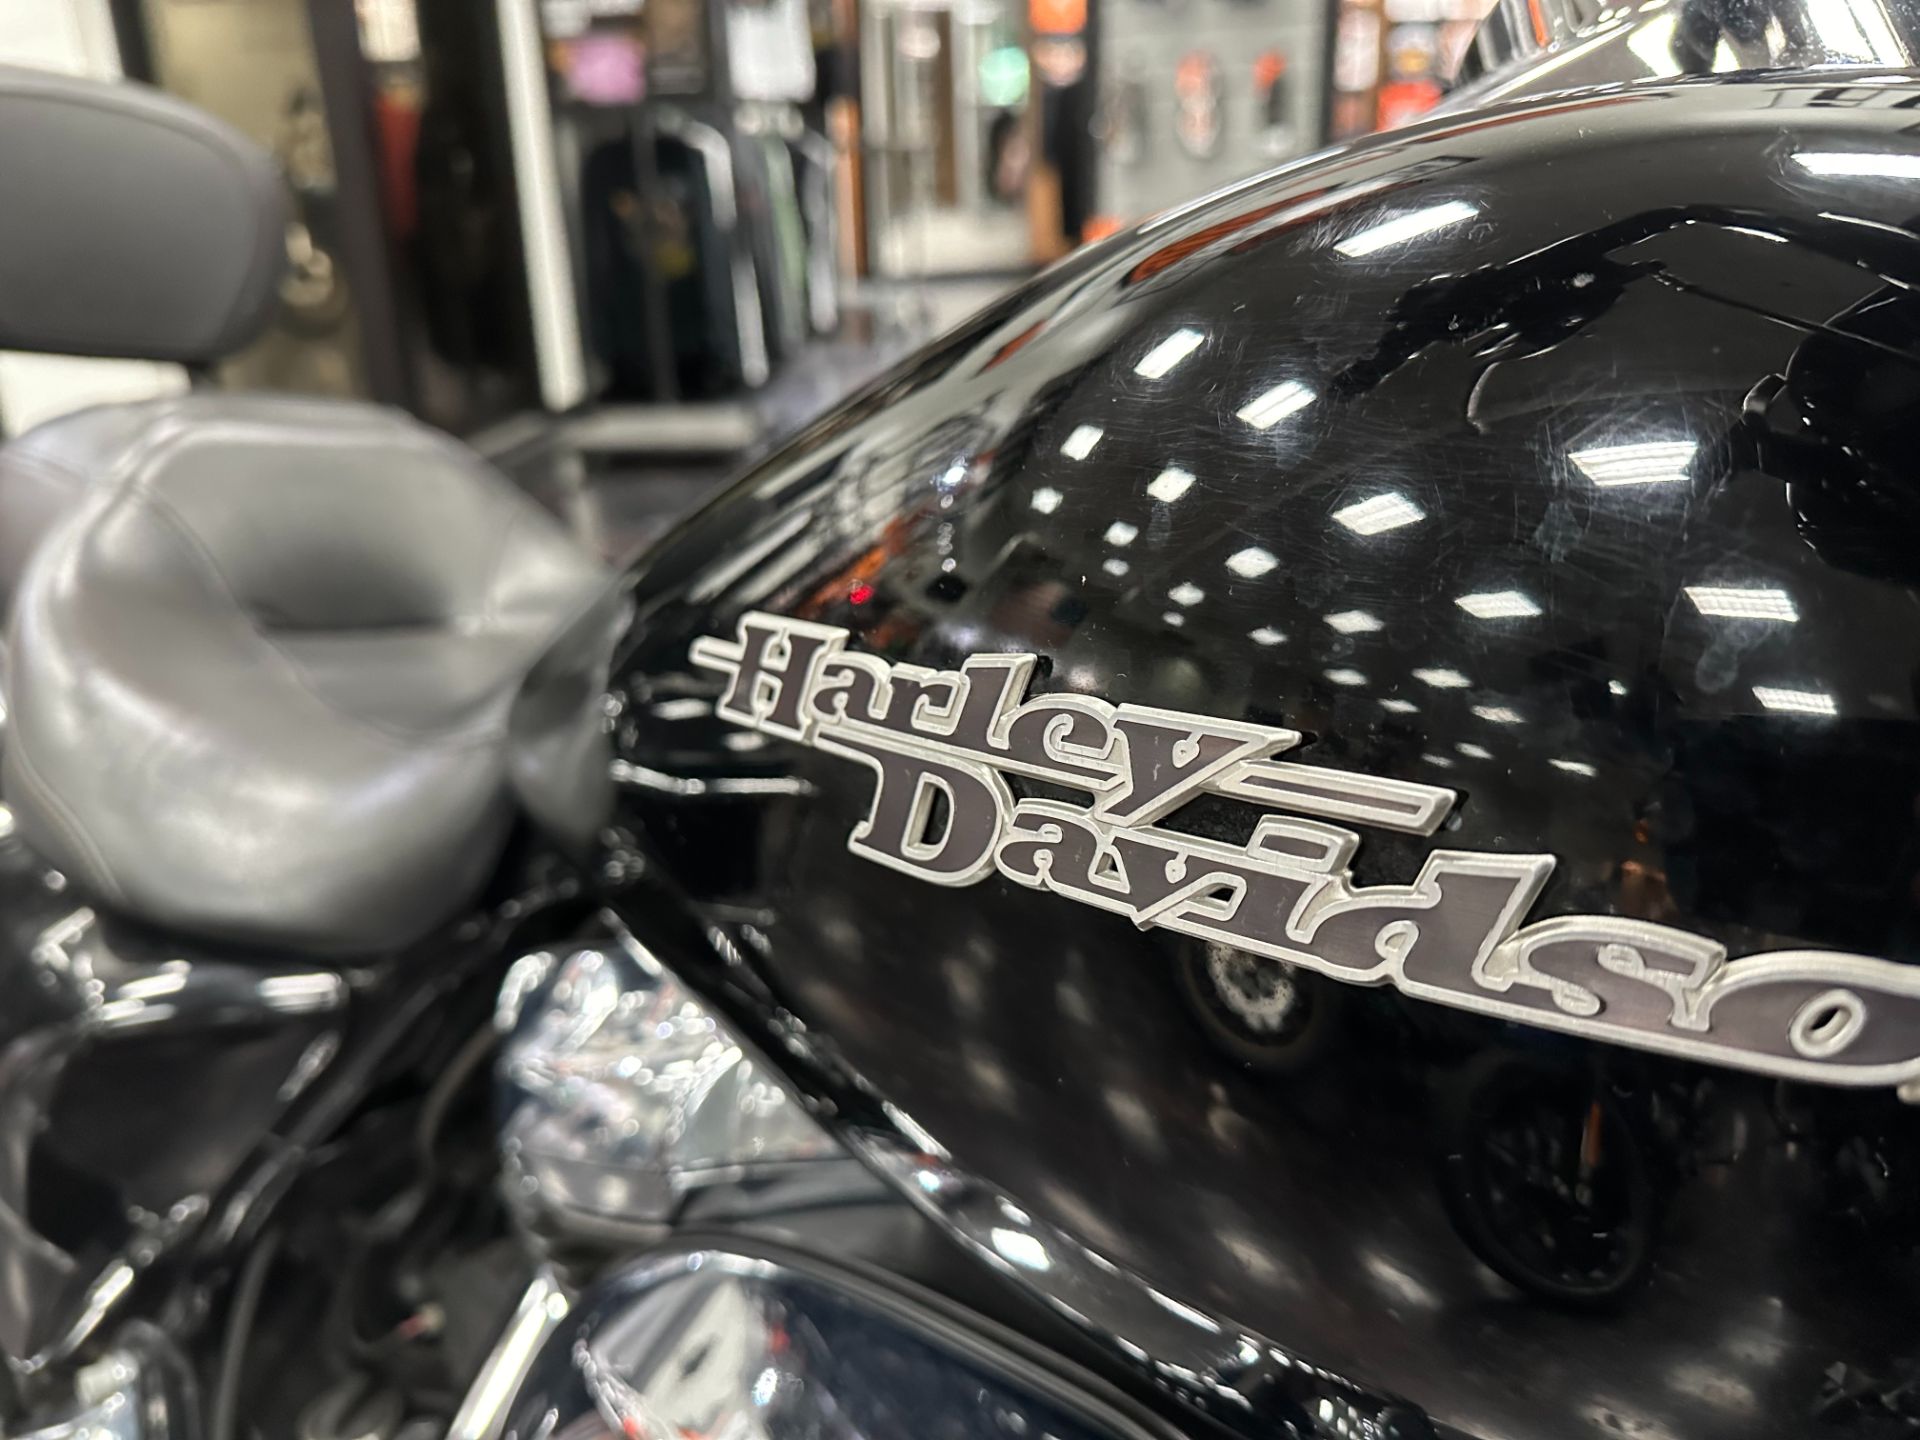 2017 Harley-Davidson Street Glide® Special in Metairie, Louisiana - Photo 5